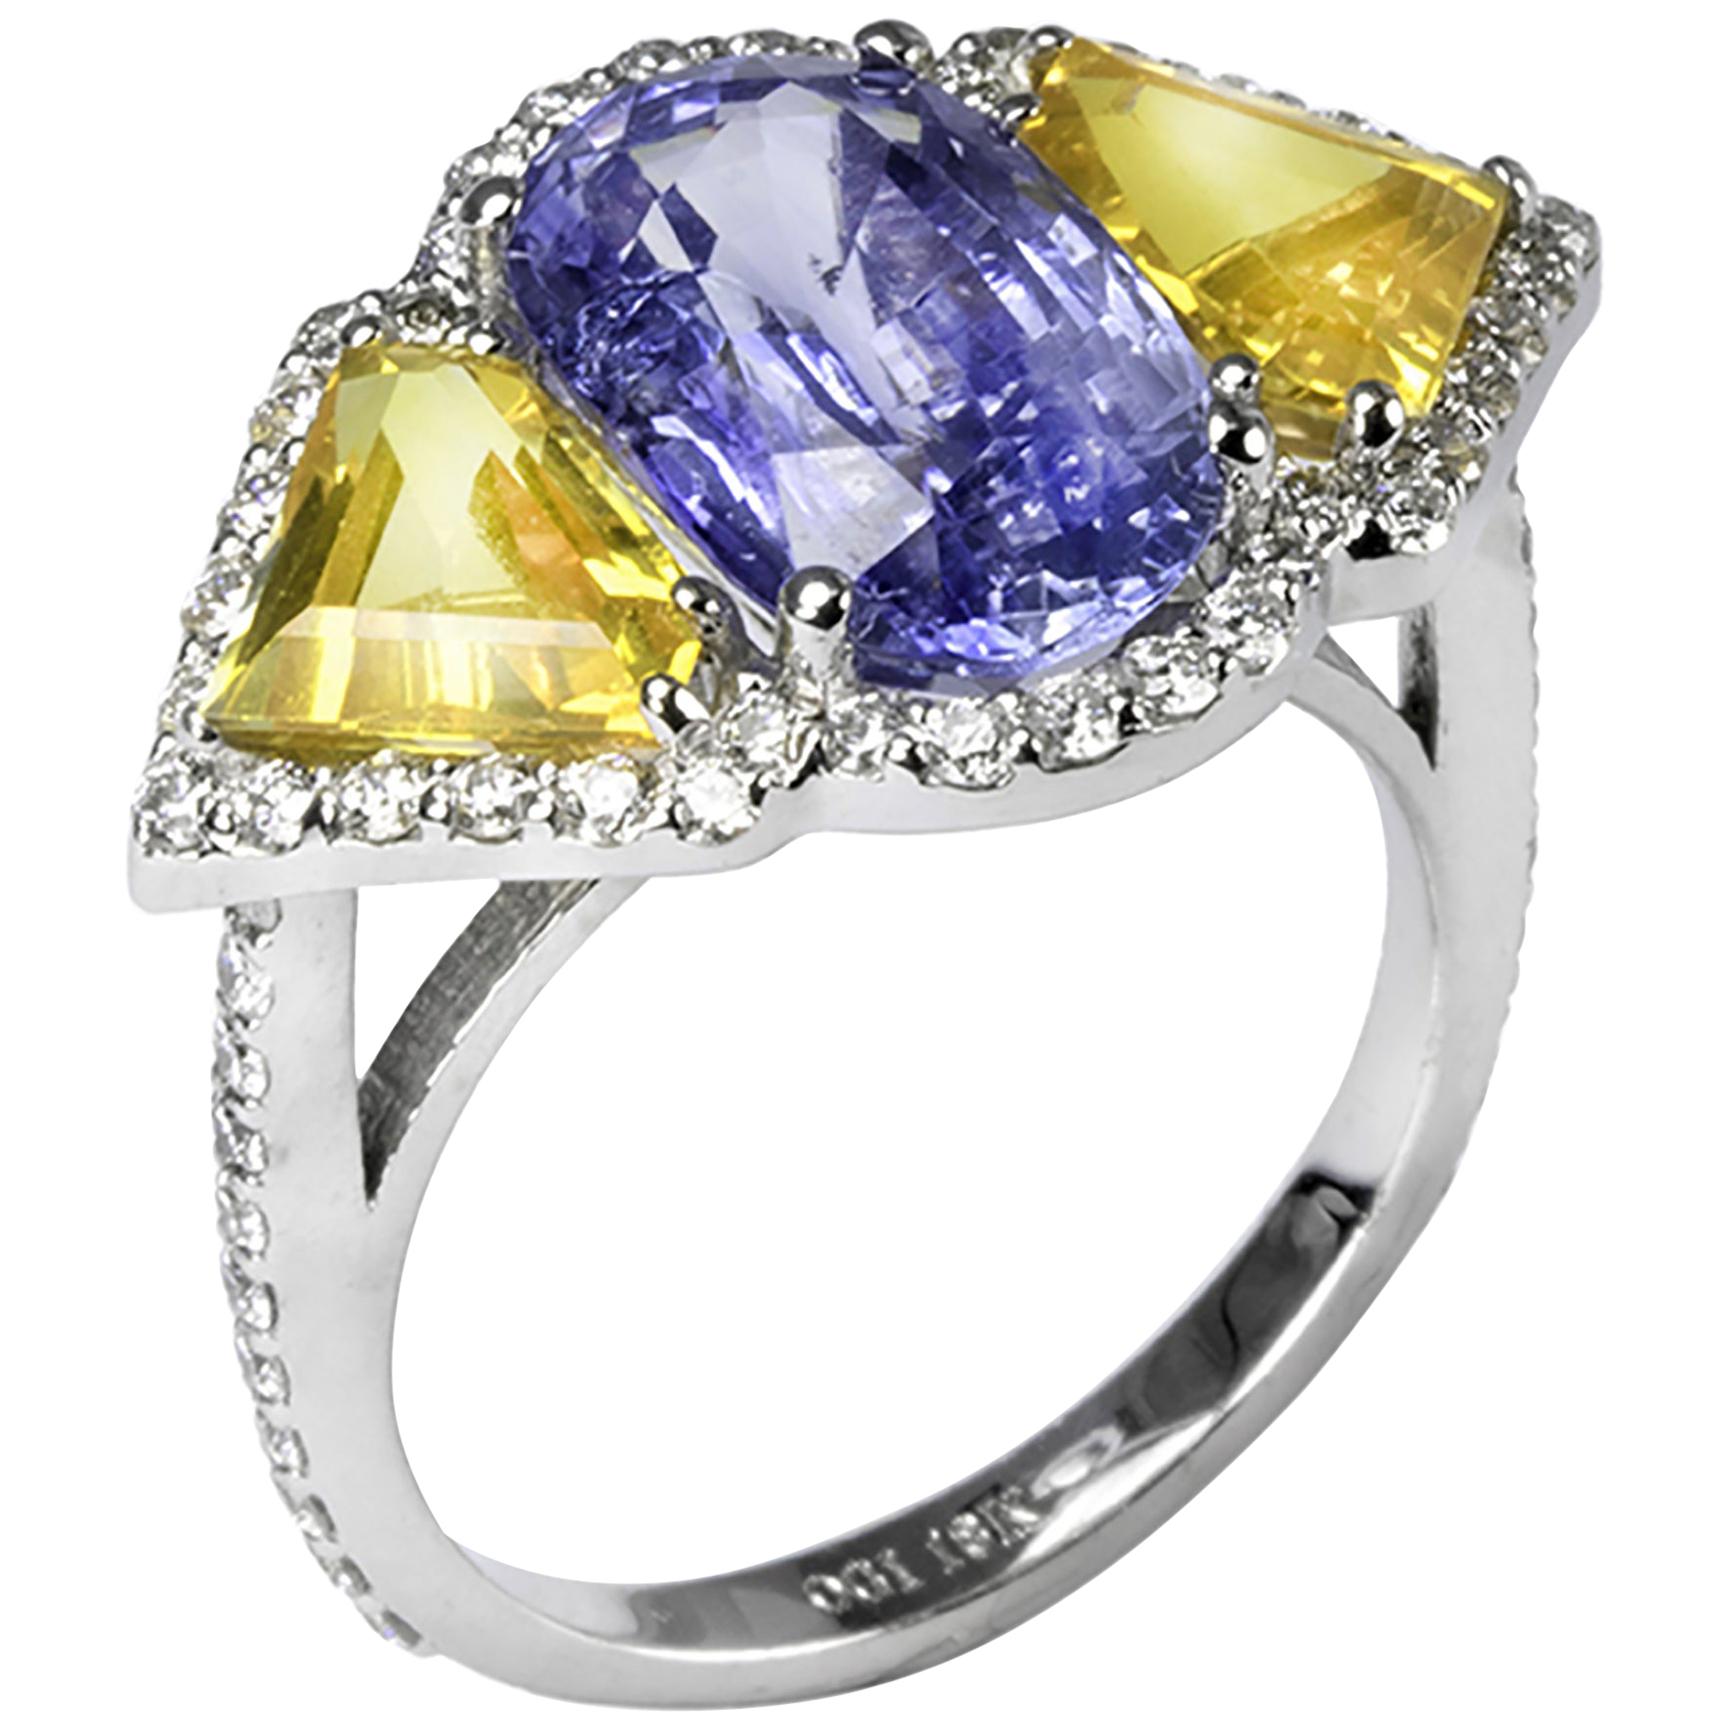 Ceylon Blue and Yellow Sapphire Diamond Gold Cocktail Ring Weighing 8.26 Carat 3